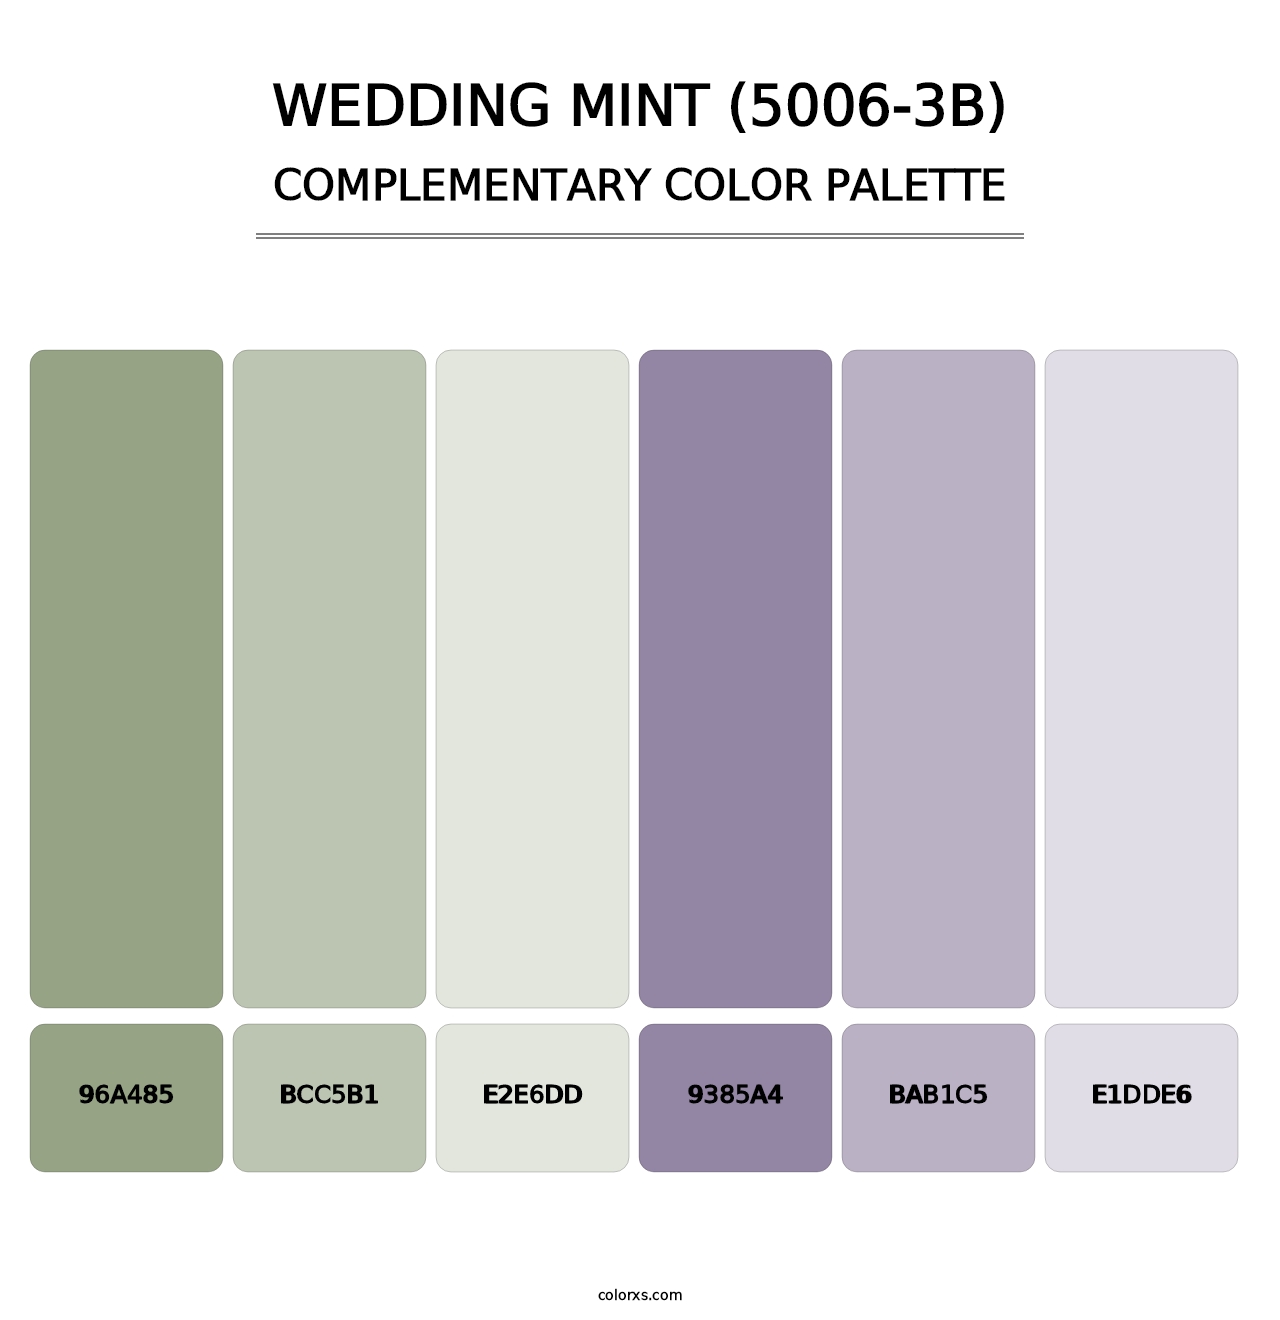 Wedding Mint (5006-3B) - Complementary Color Palette